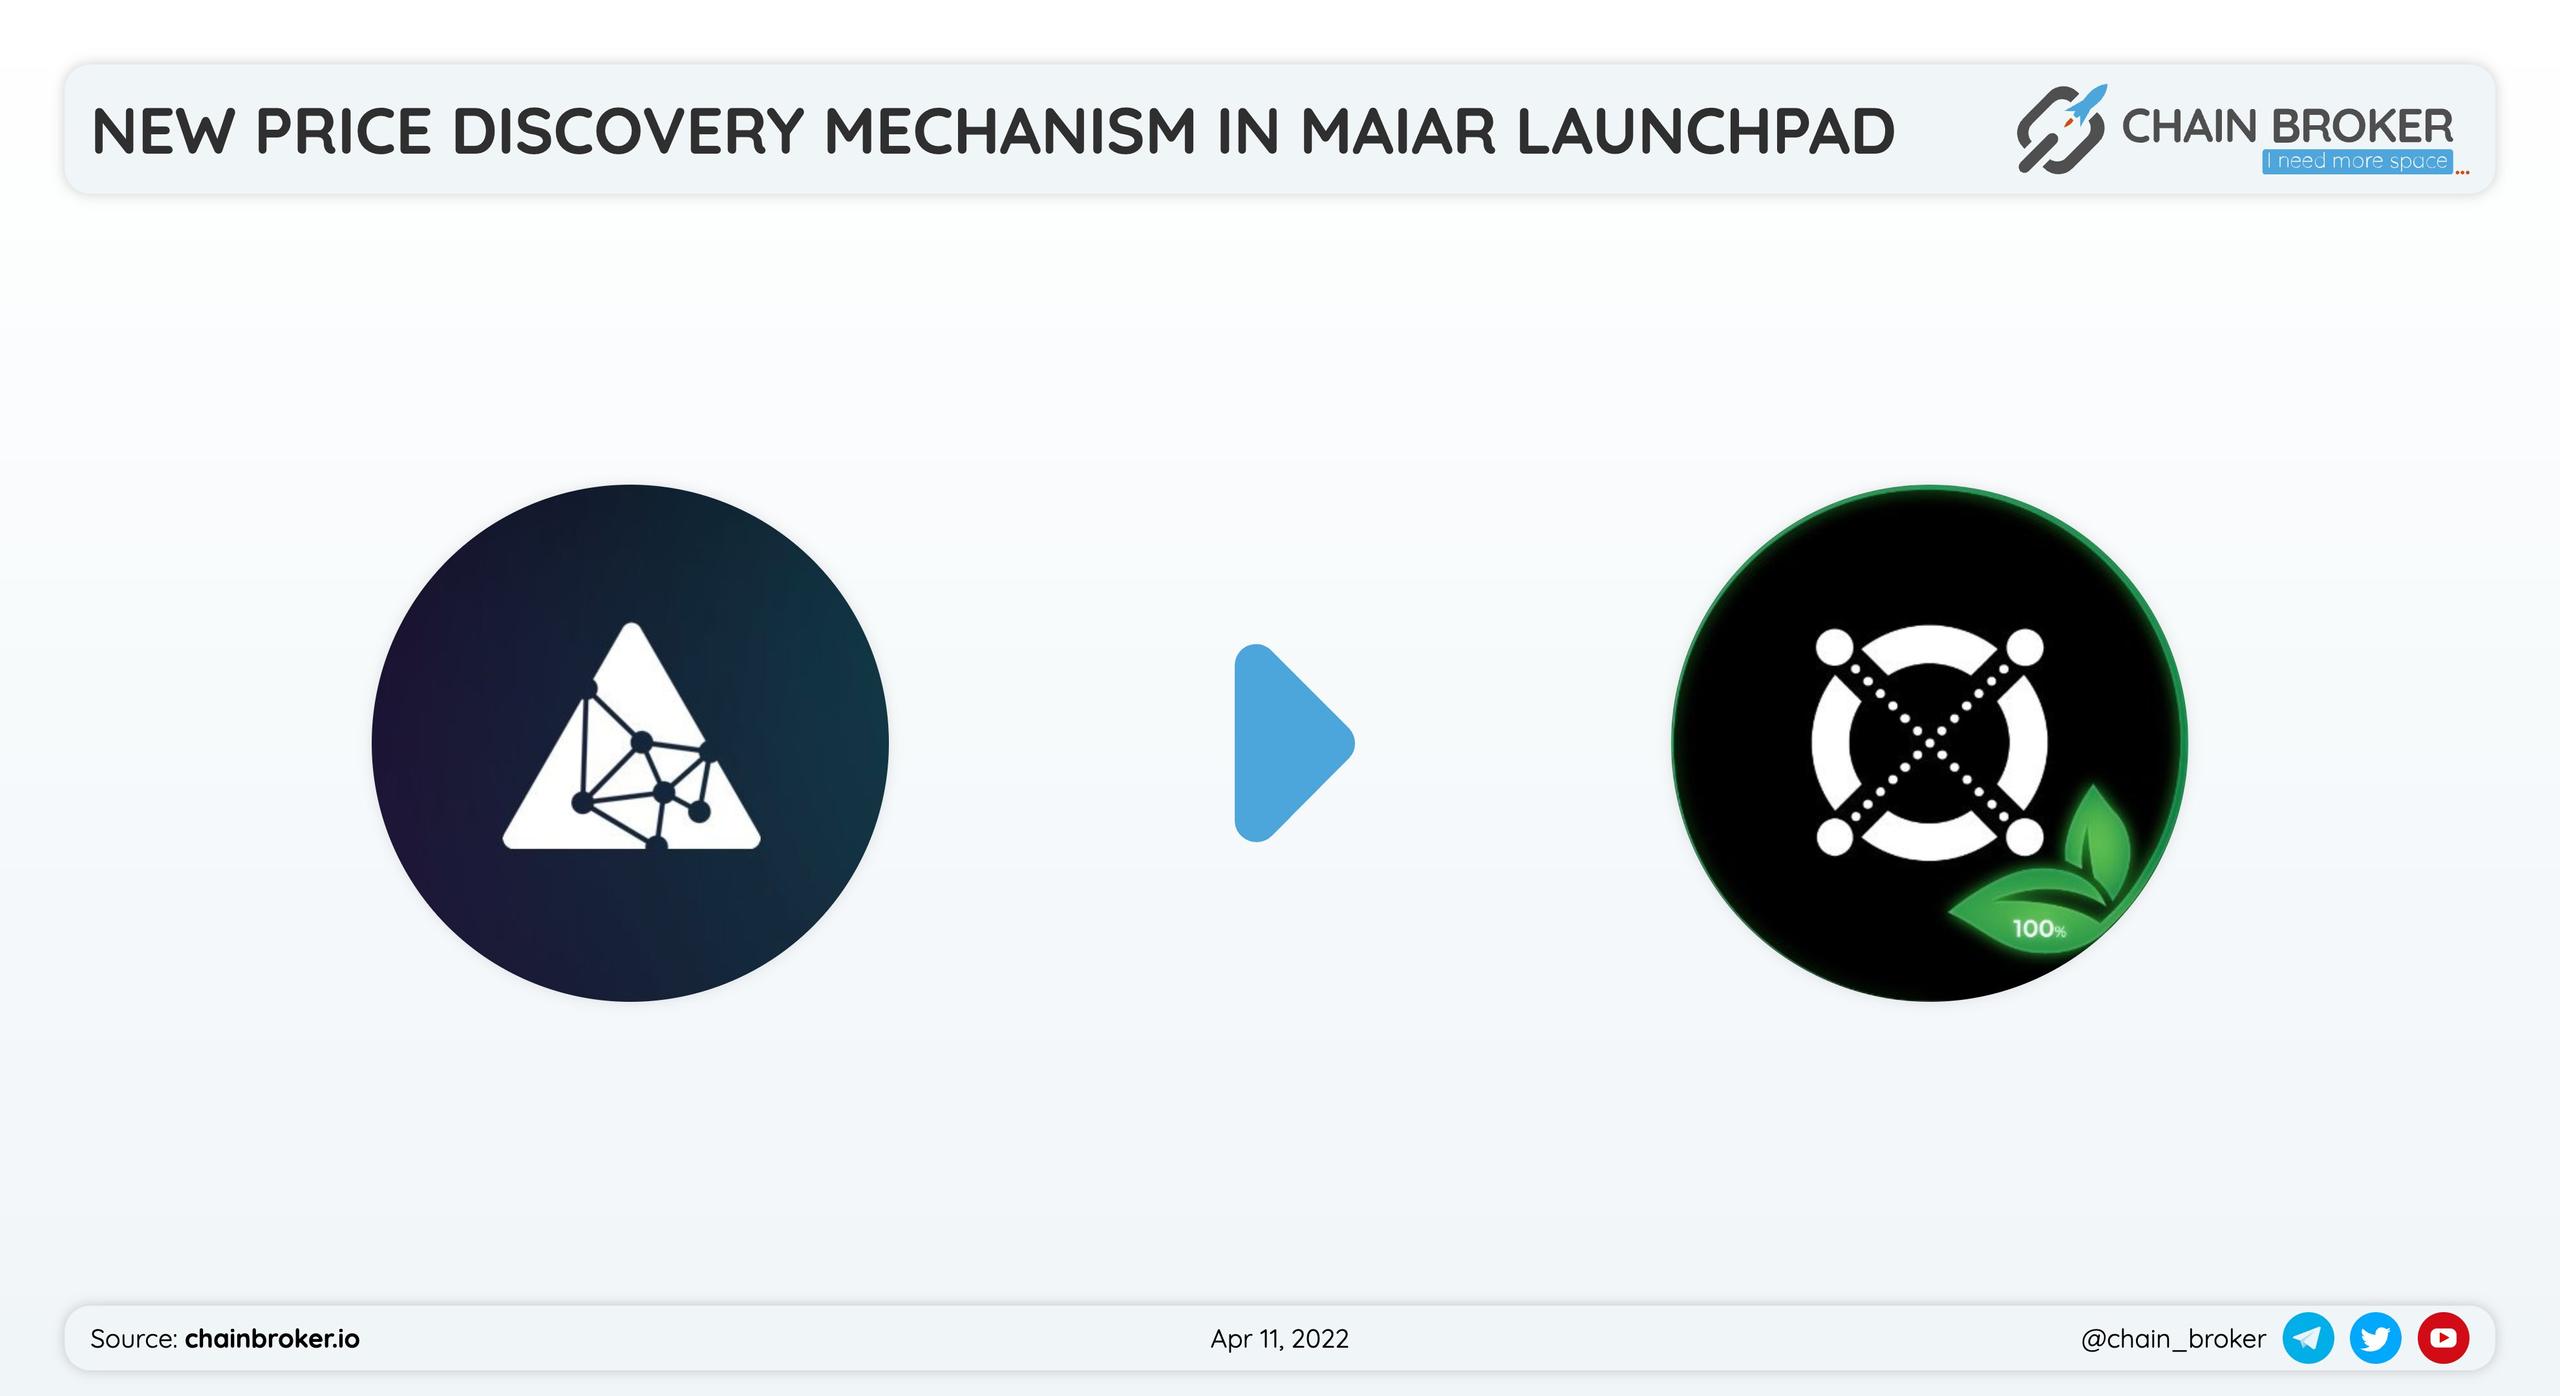 Elrond Network has launched price discovery mechanism.